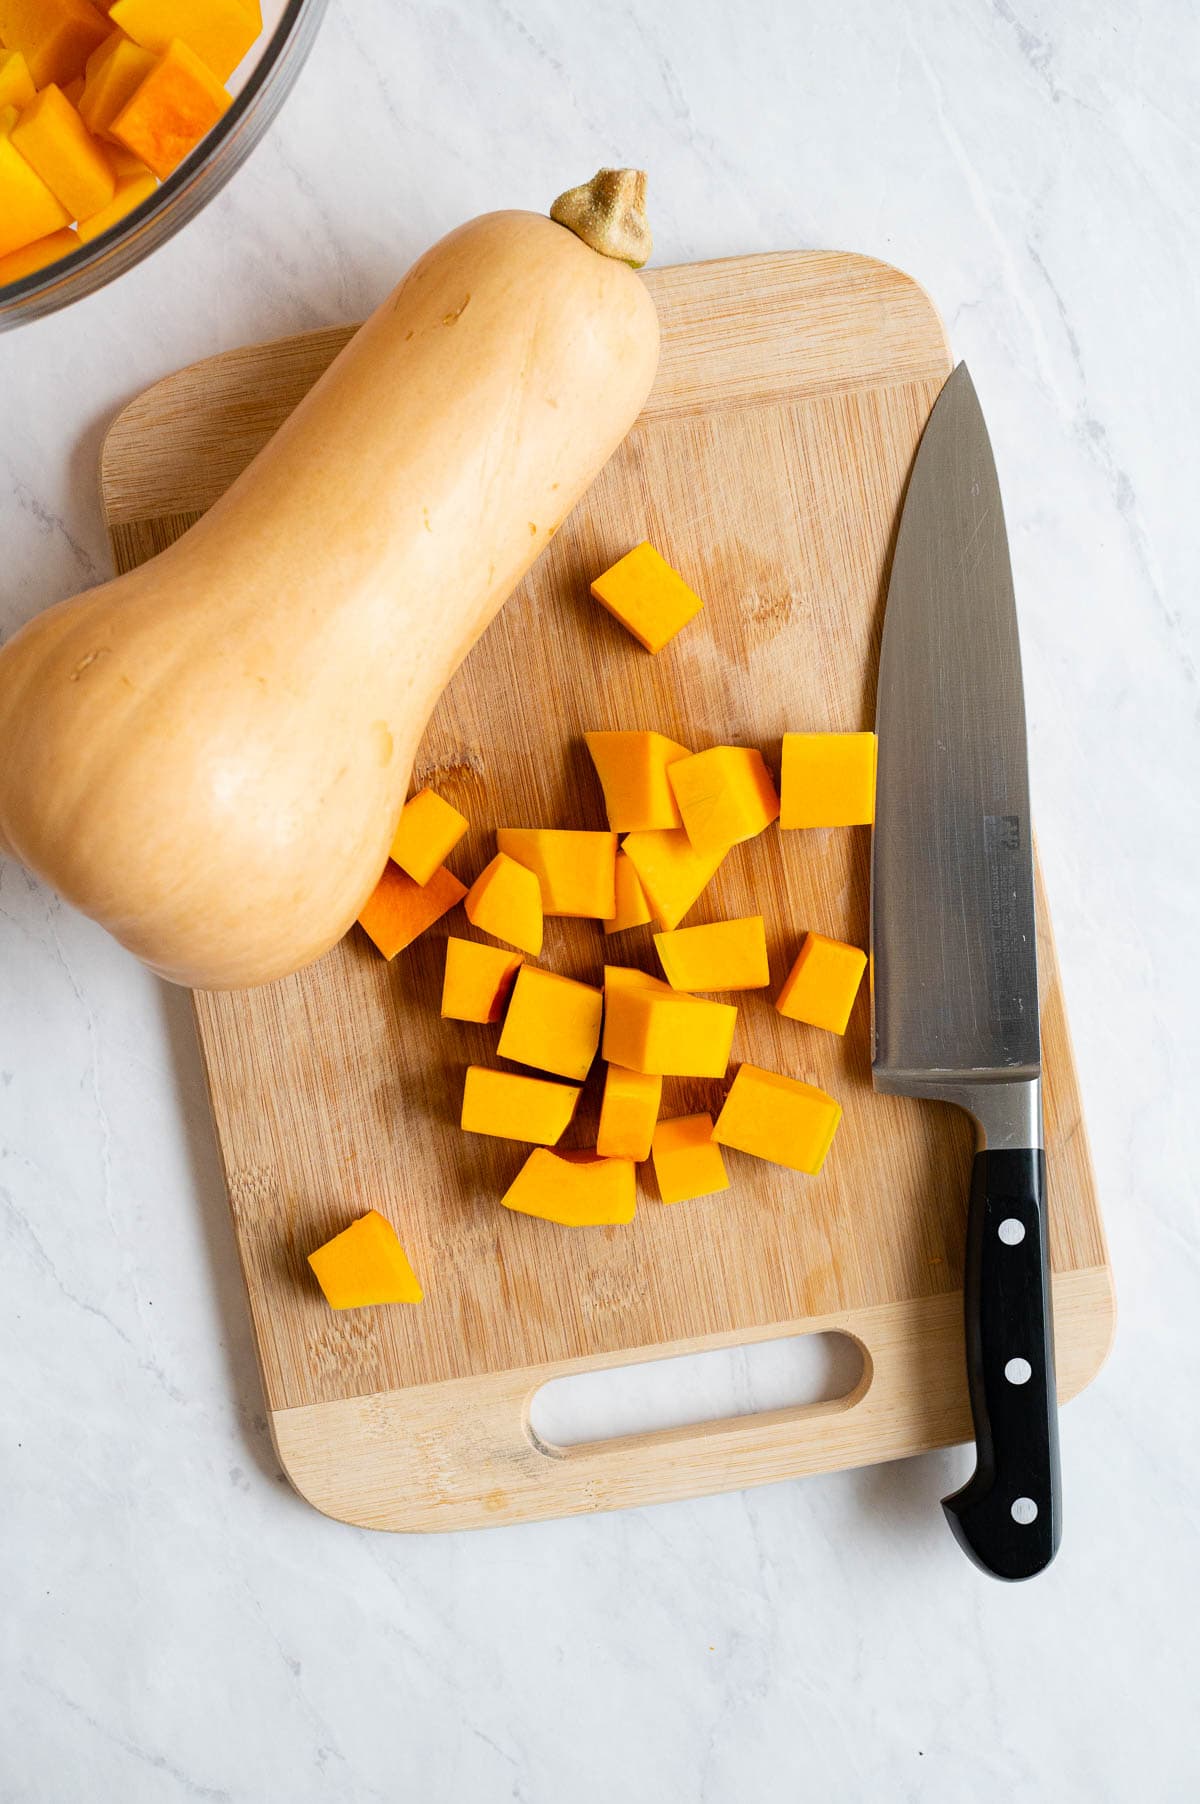 Cubed butternut squash on a cutting board with a knife and whole squash.